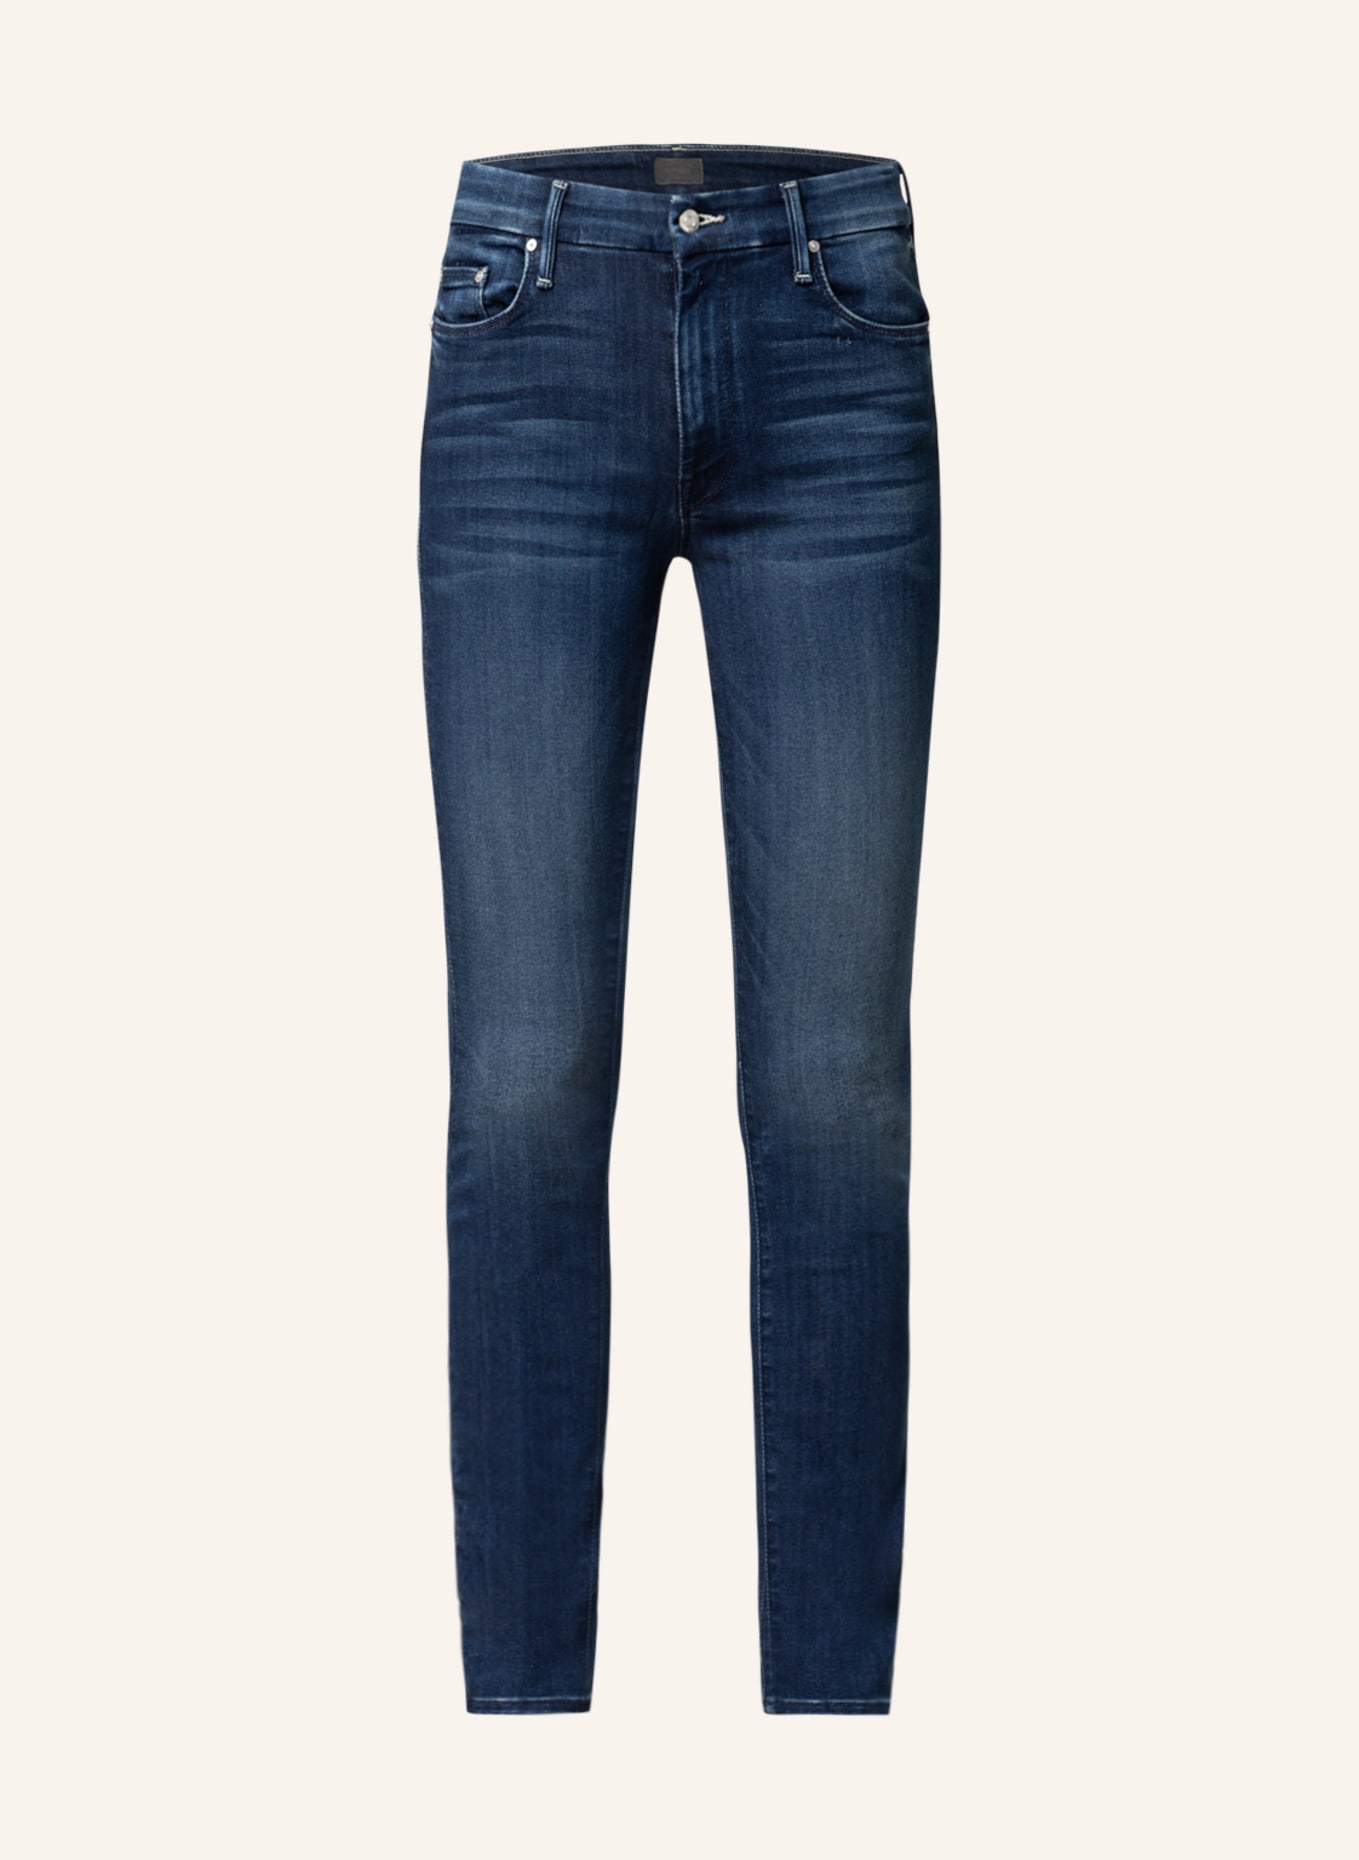 MOTHER Skinny Jeans THE LOOKER SKINNY , Farbe: tongue and chic dunkelblau denim(Bild null)